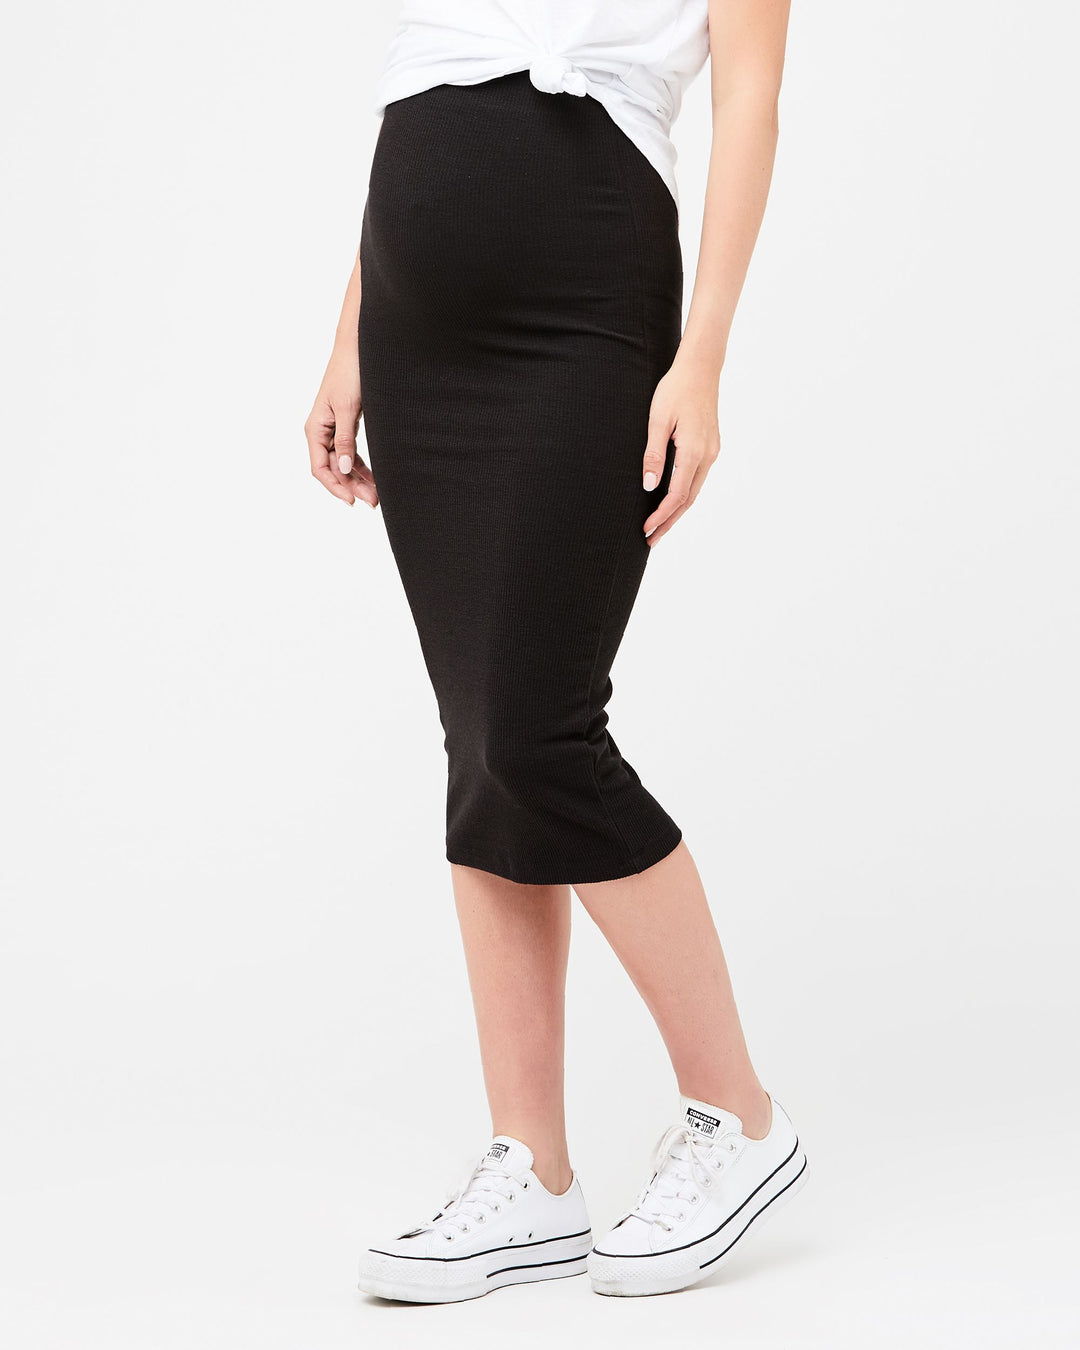 RIPE Ribbed Knit Pencil Skirt in Black - Nest and Sprout Maternity